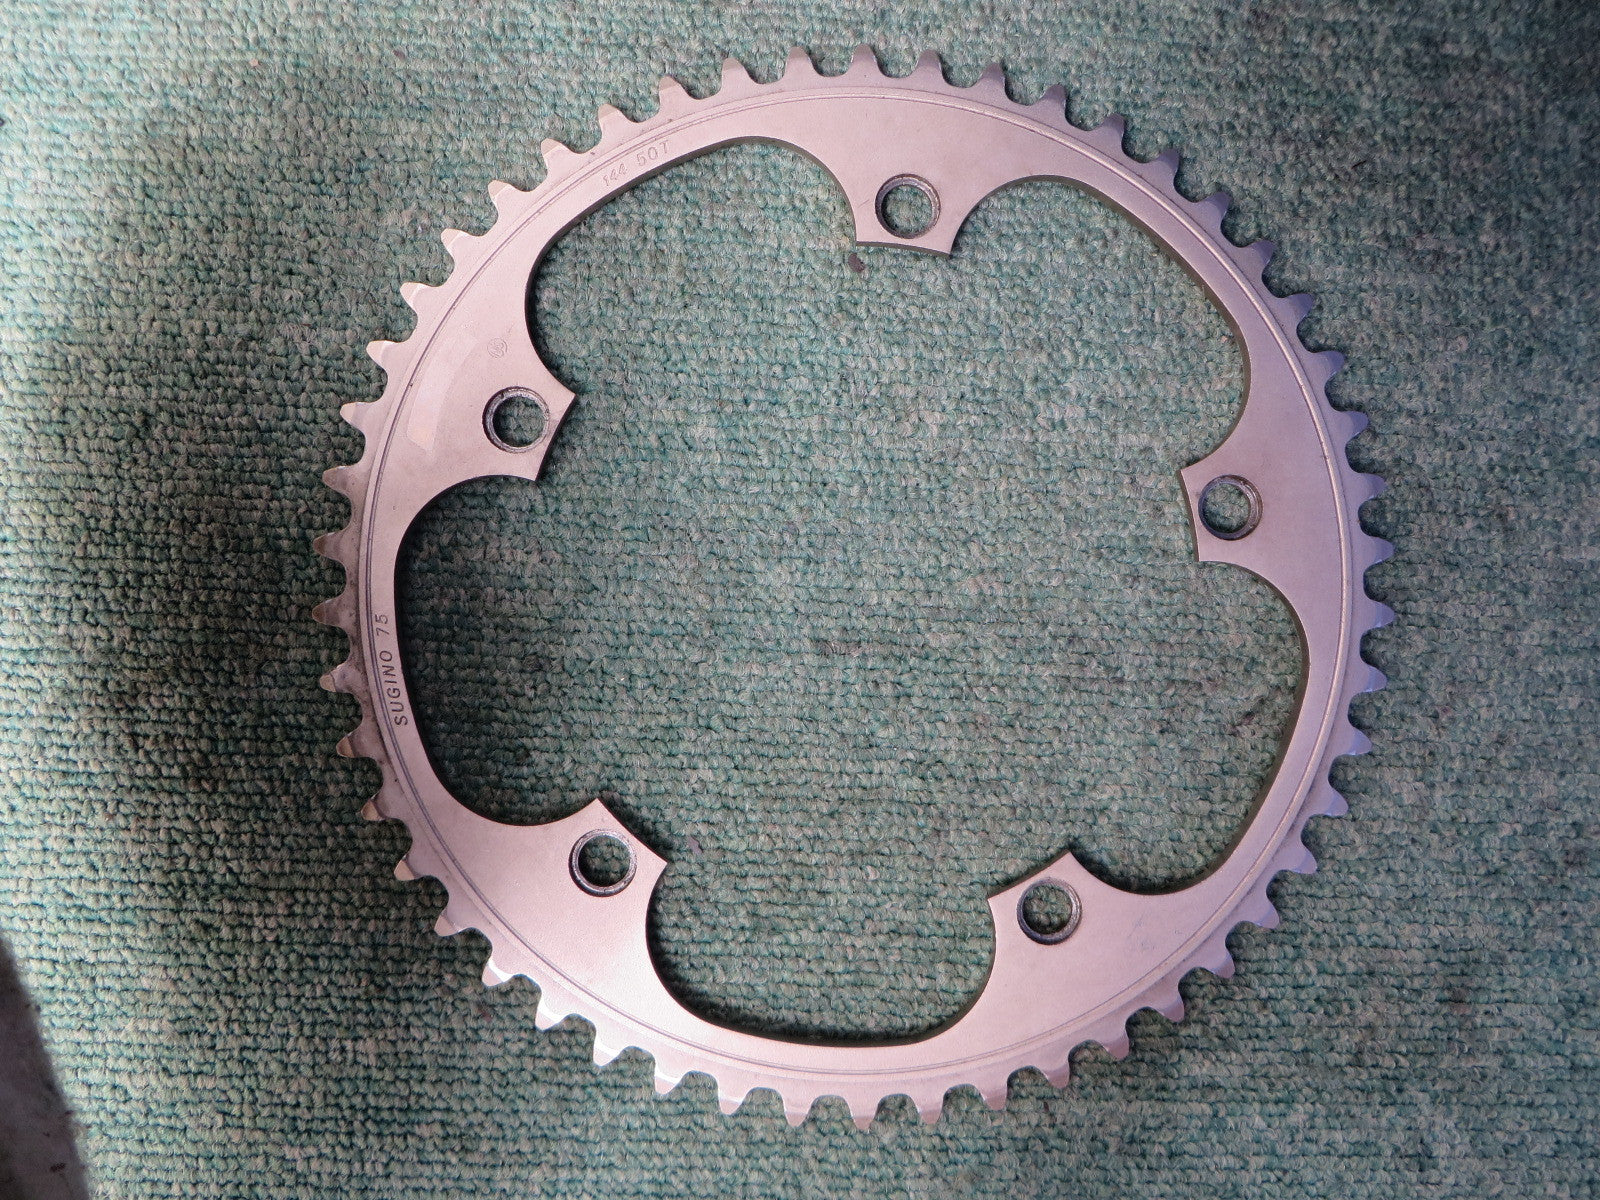 Sugino S-cubic Matte Finish 1/8" 144BCD NJS Chainring 50T (15071704)